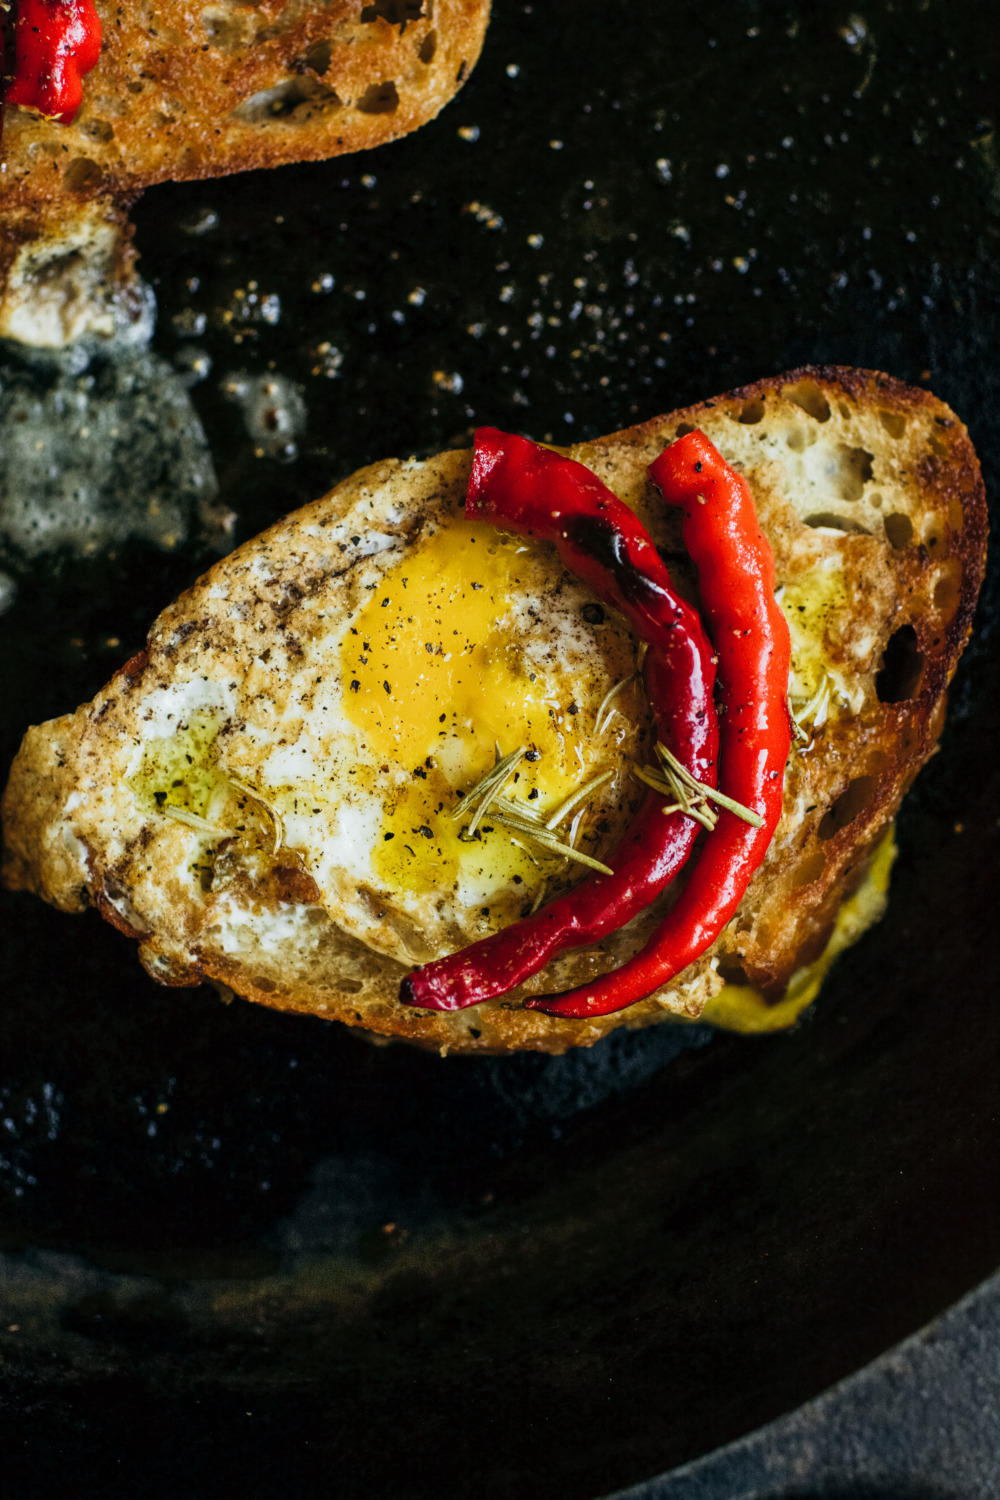 Moonstruck Eggs with Fried Italian Long Hot Peppers